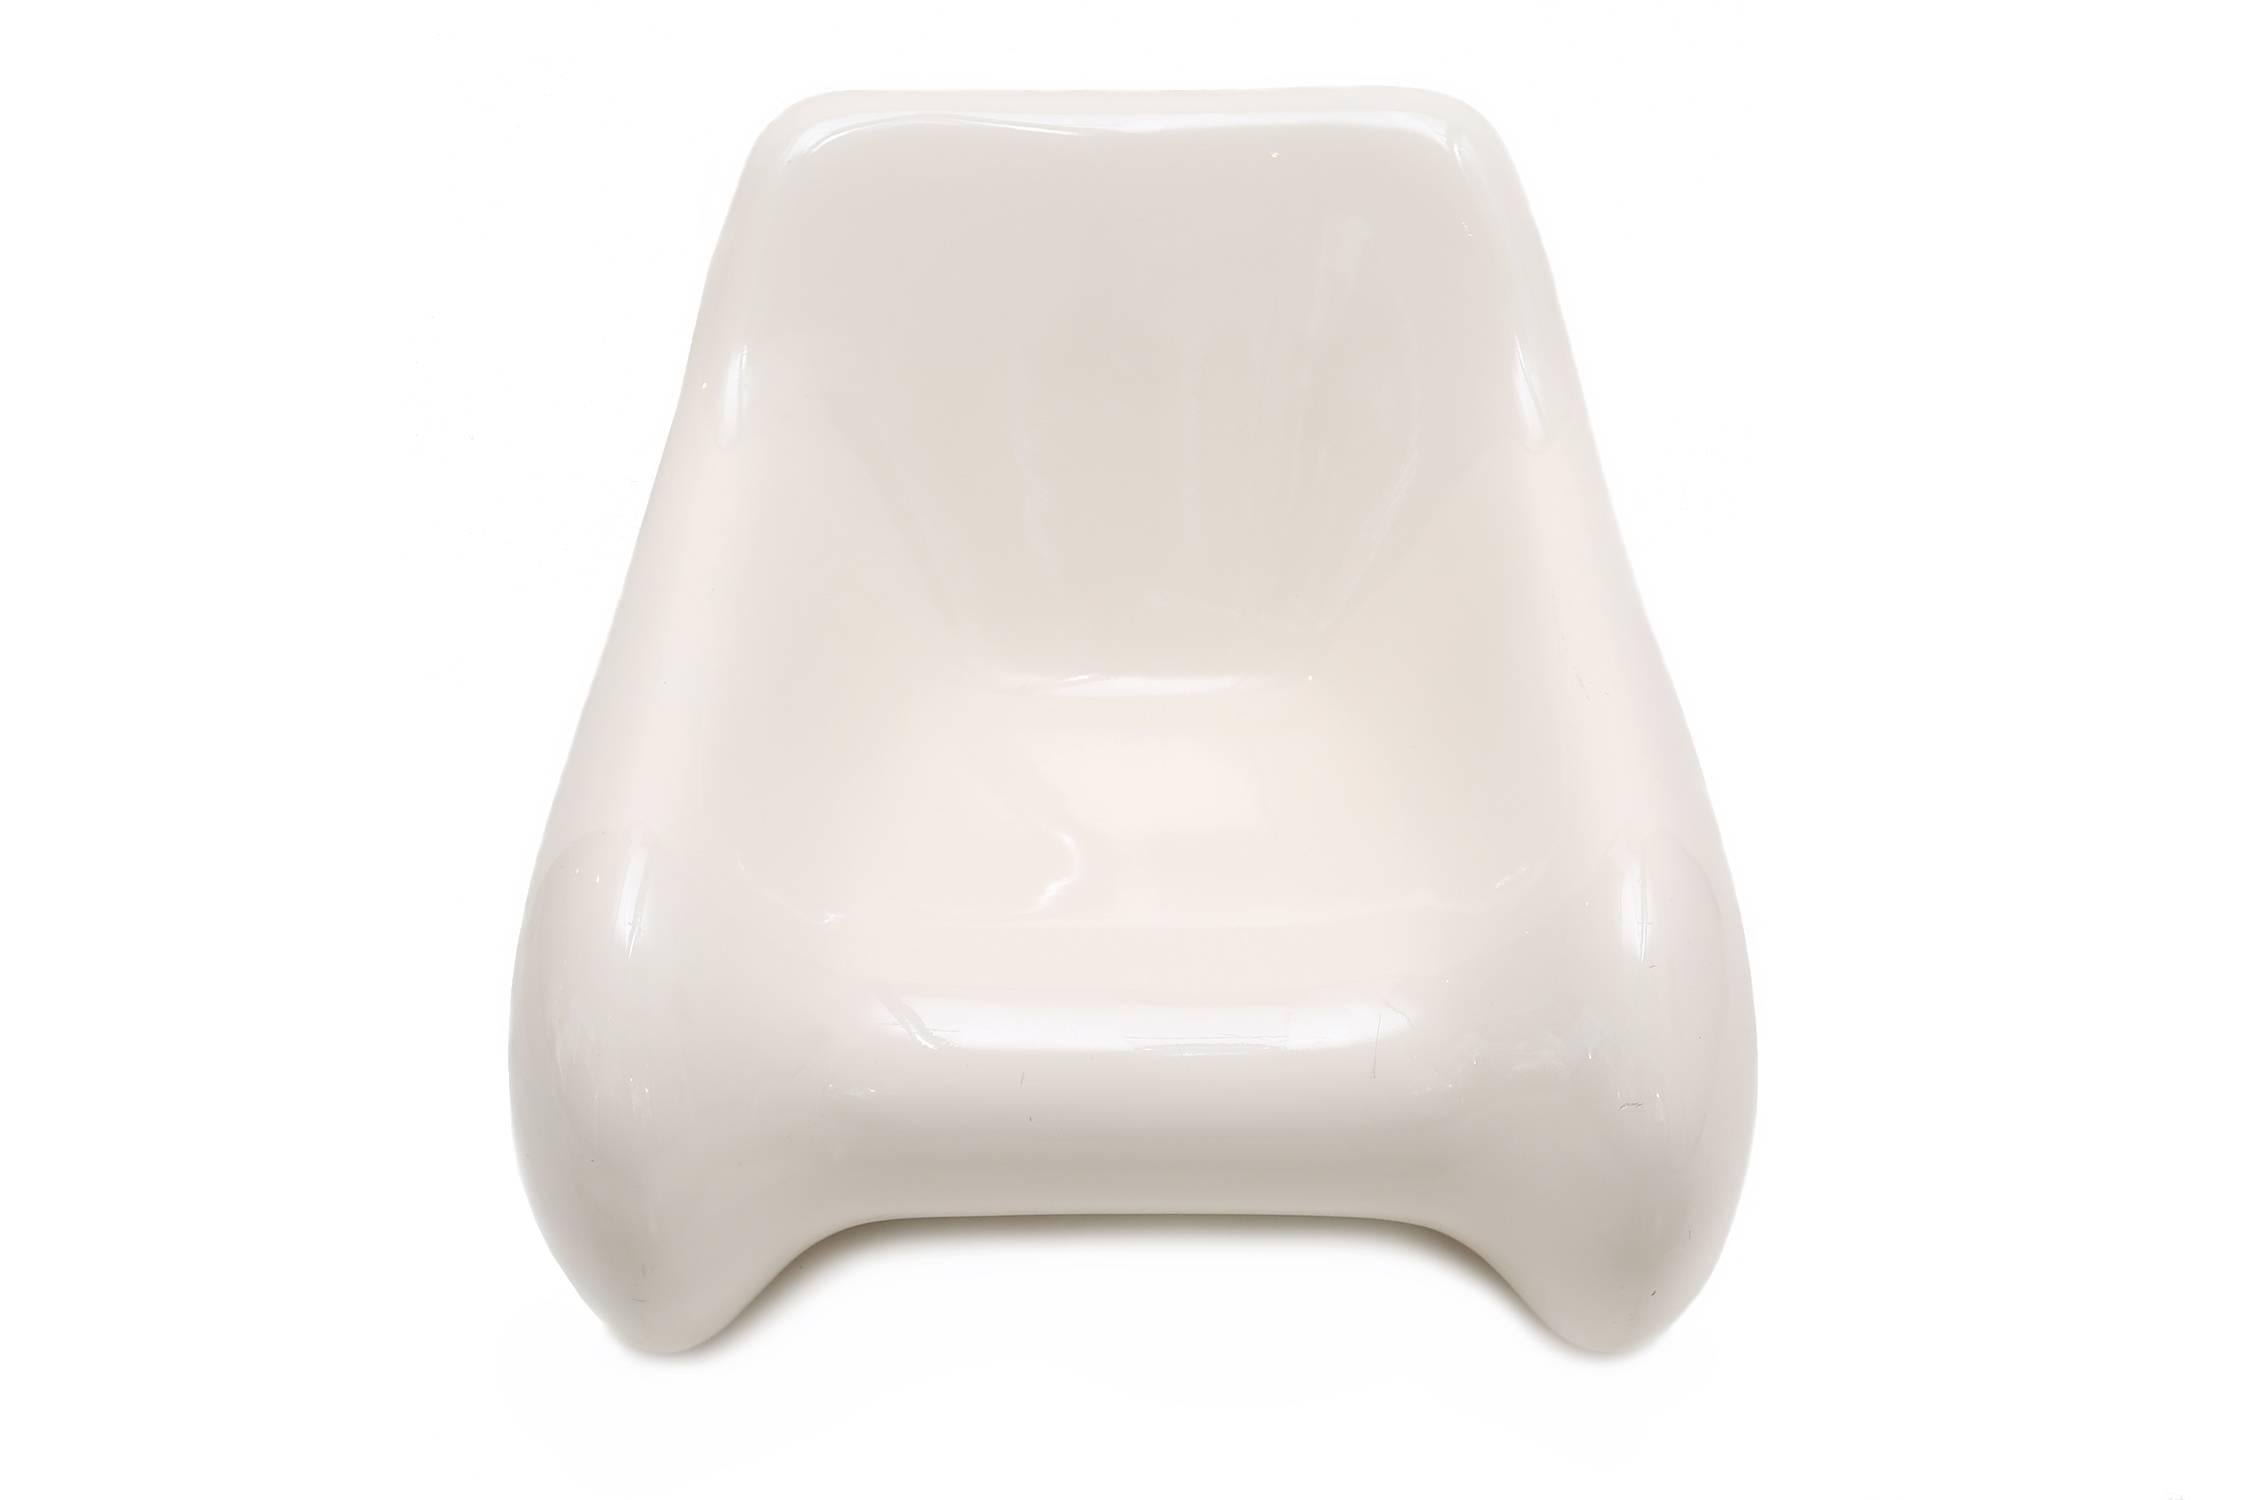 Targa lounge chair designed by Klaus Uredat and manufactured by Horn Collection GmbH, Germany in 1971. It is made from white moulded polyurethane.